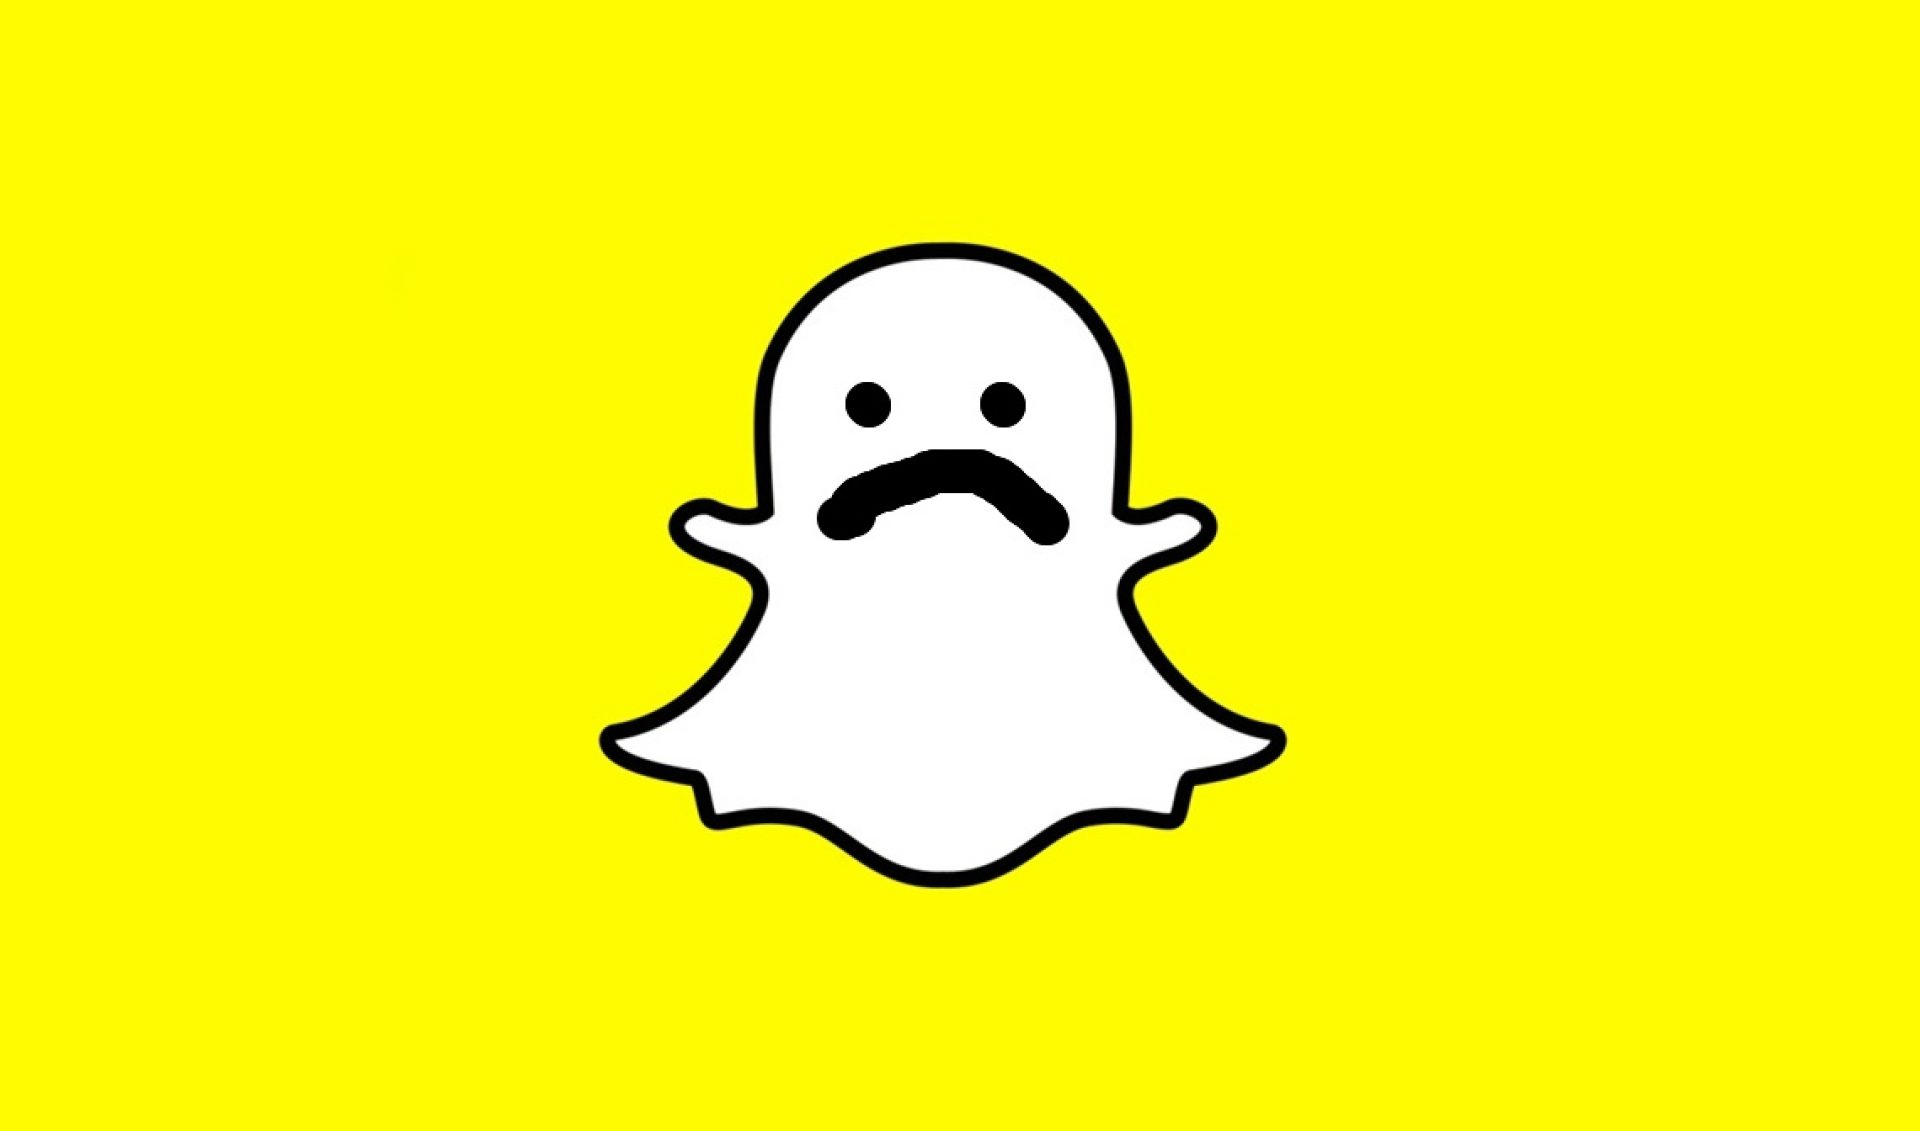 Snapchat’s First-Quarter Earnings Bring Bad News, And Its Stock Plummets By 24%